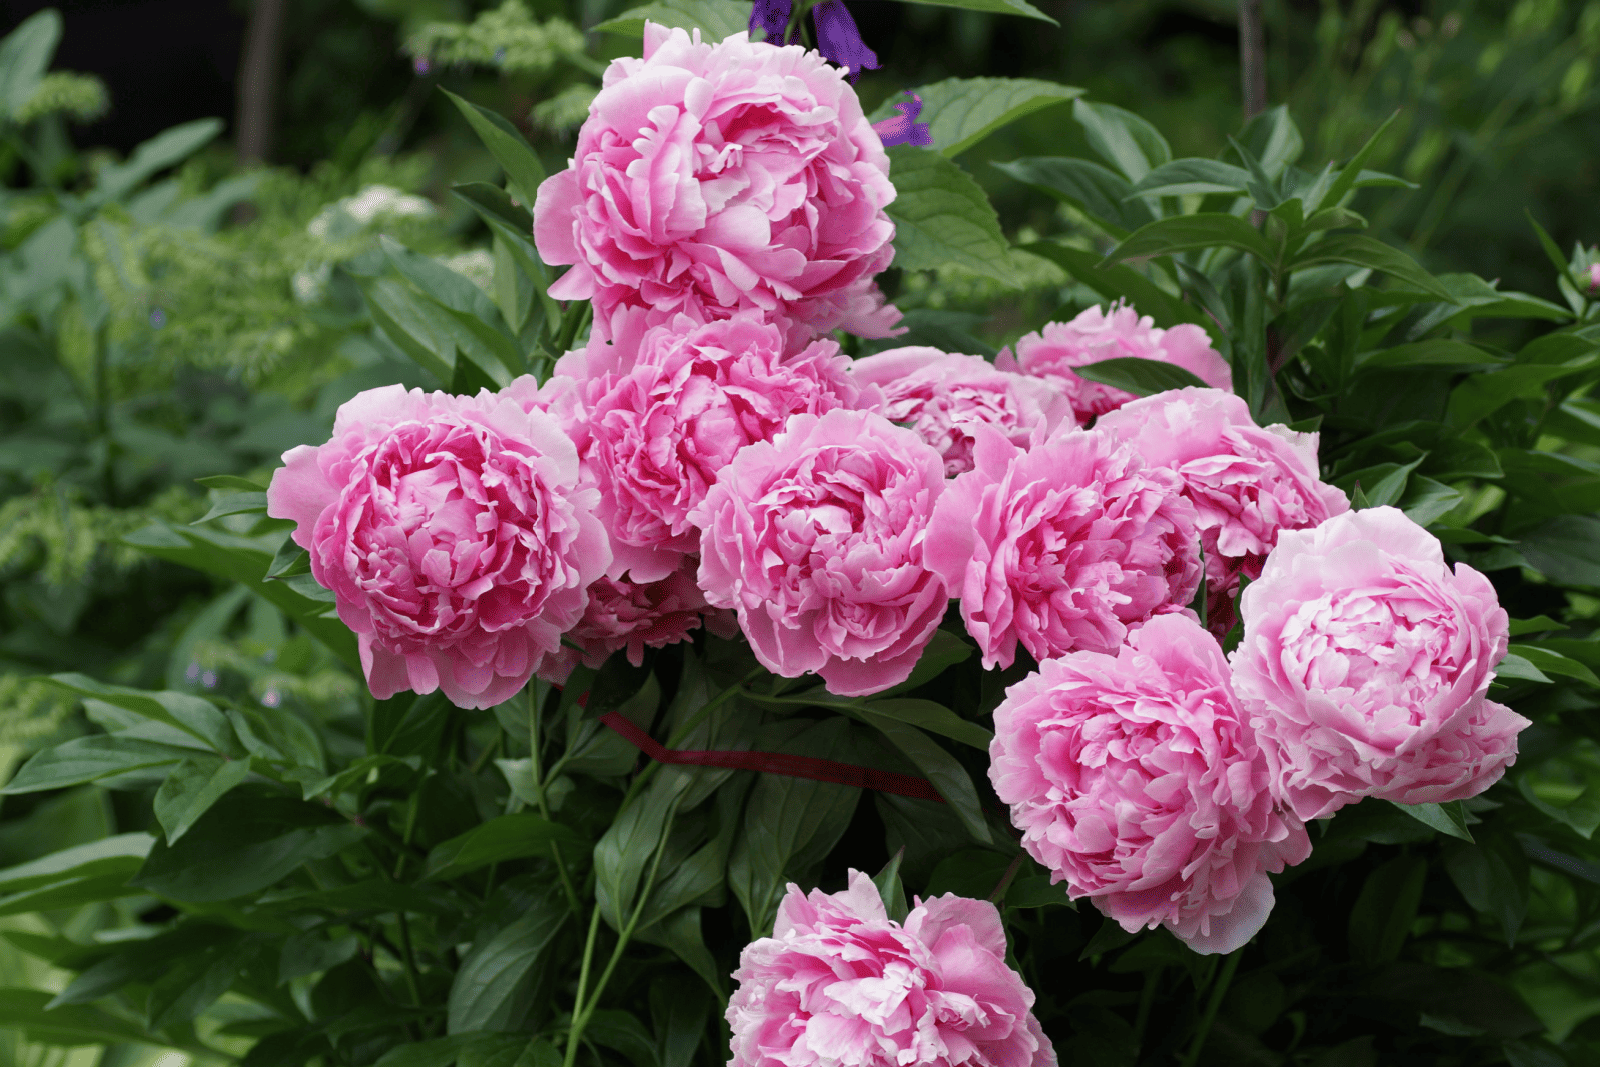 A bush of pink double peonies blooms in the garden